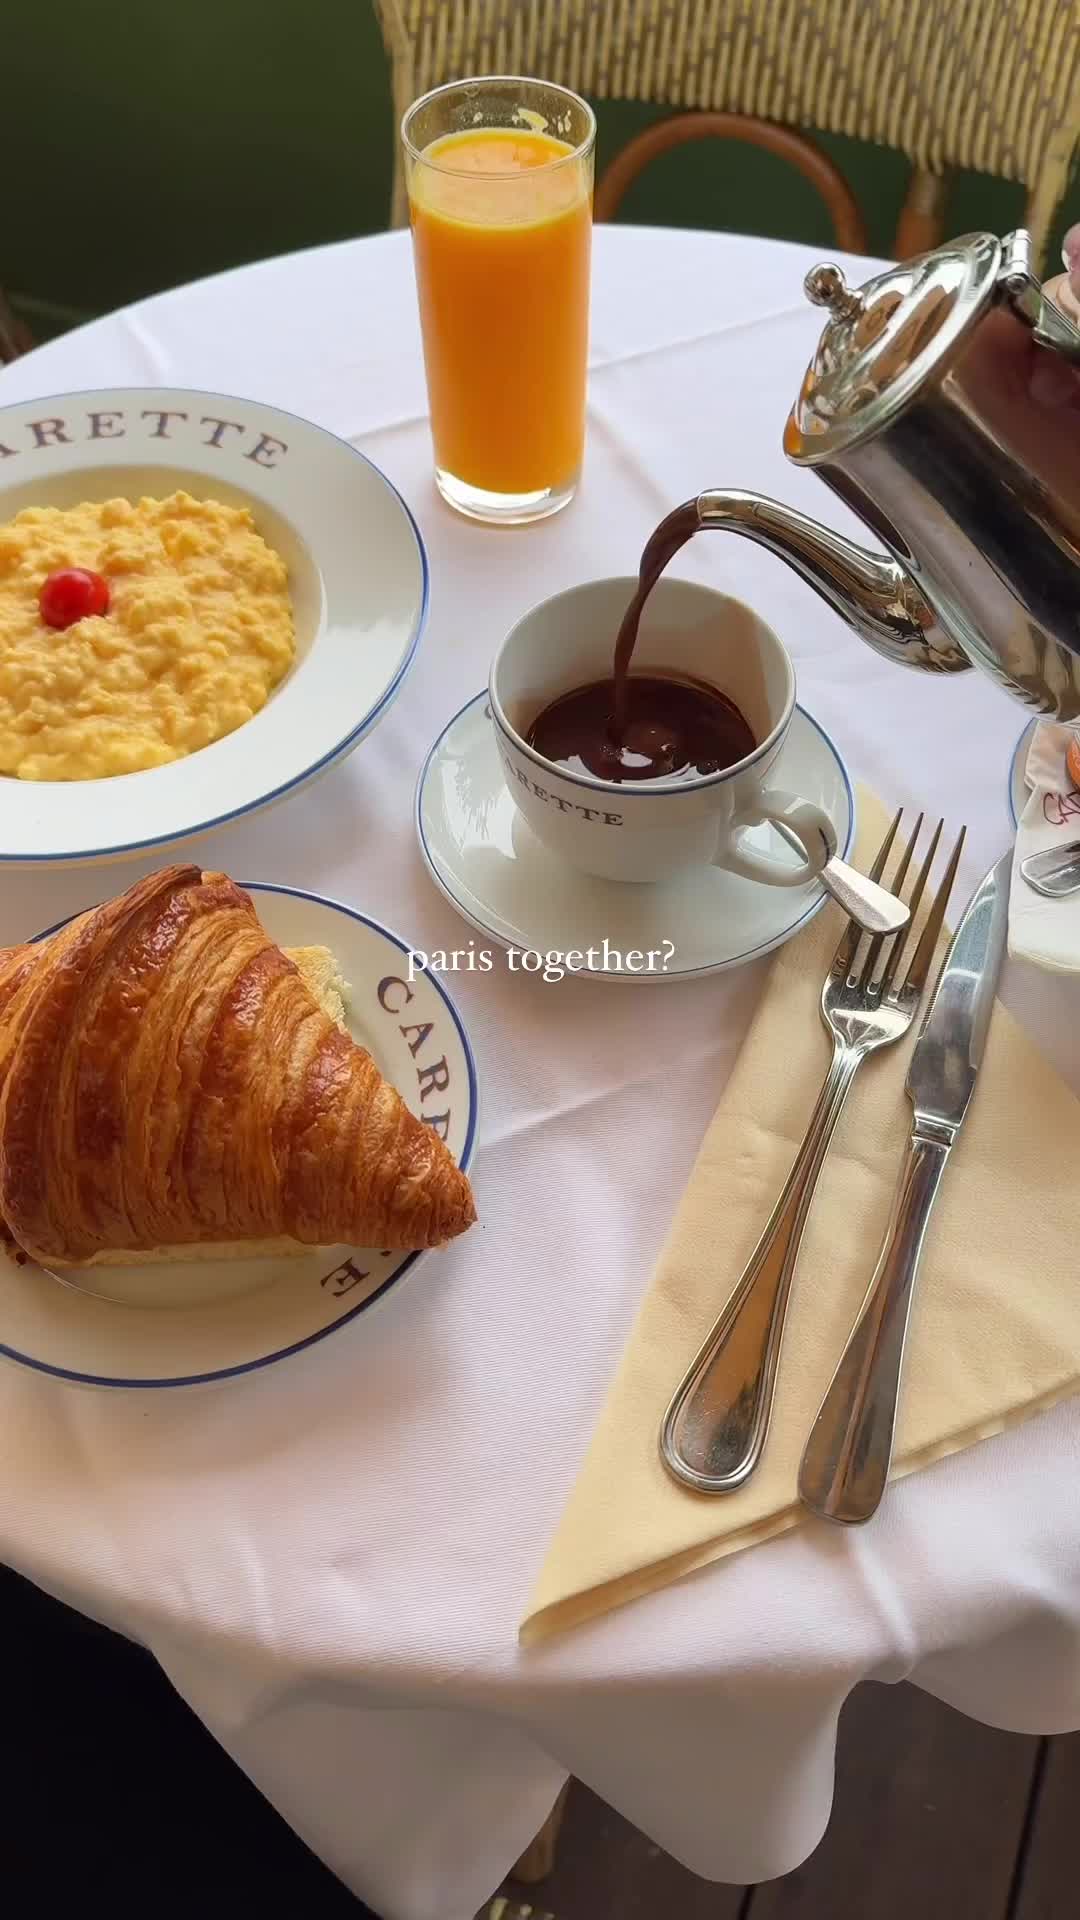 This may contain: there is a croissant, coffee and orange juice on the table with silverware